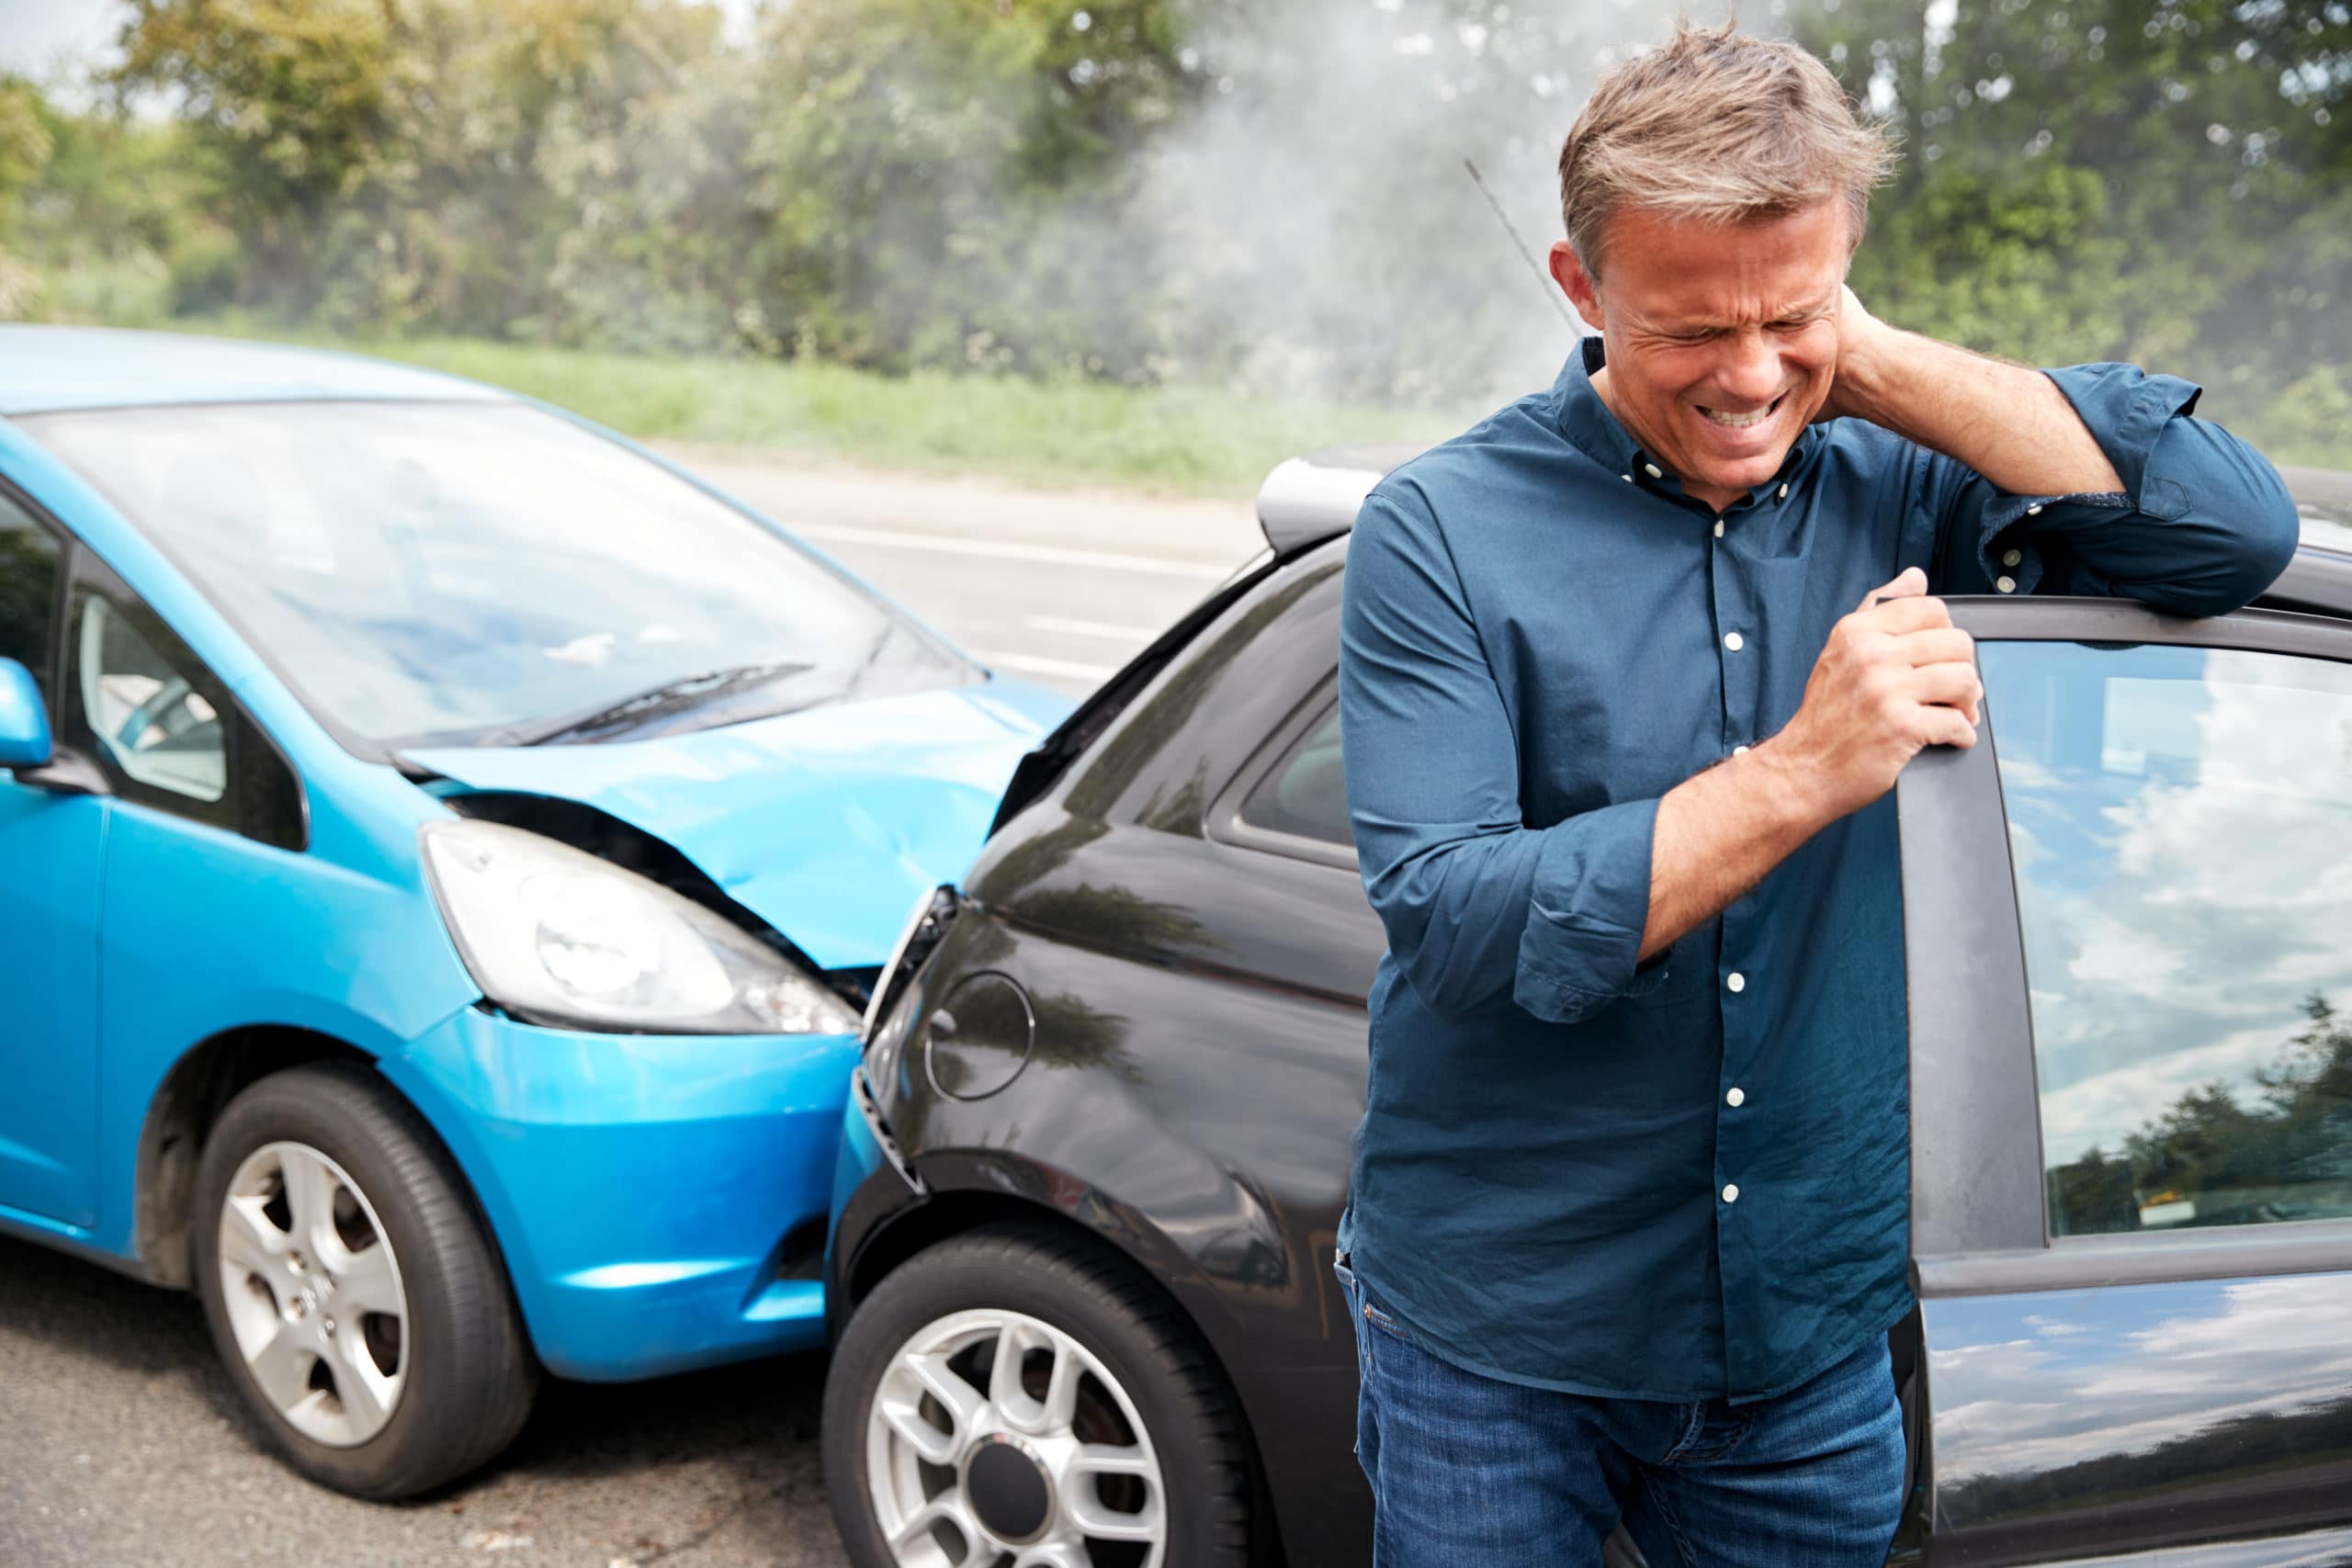 What Happens If You Are At Fault In A Car Accident?